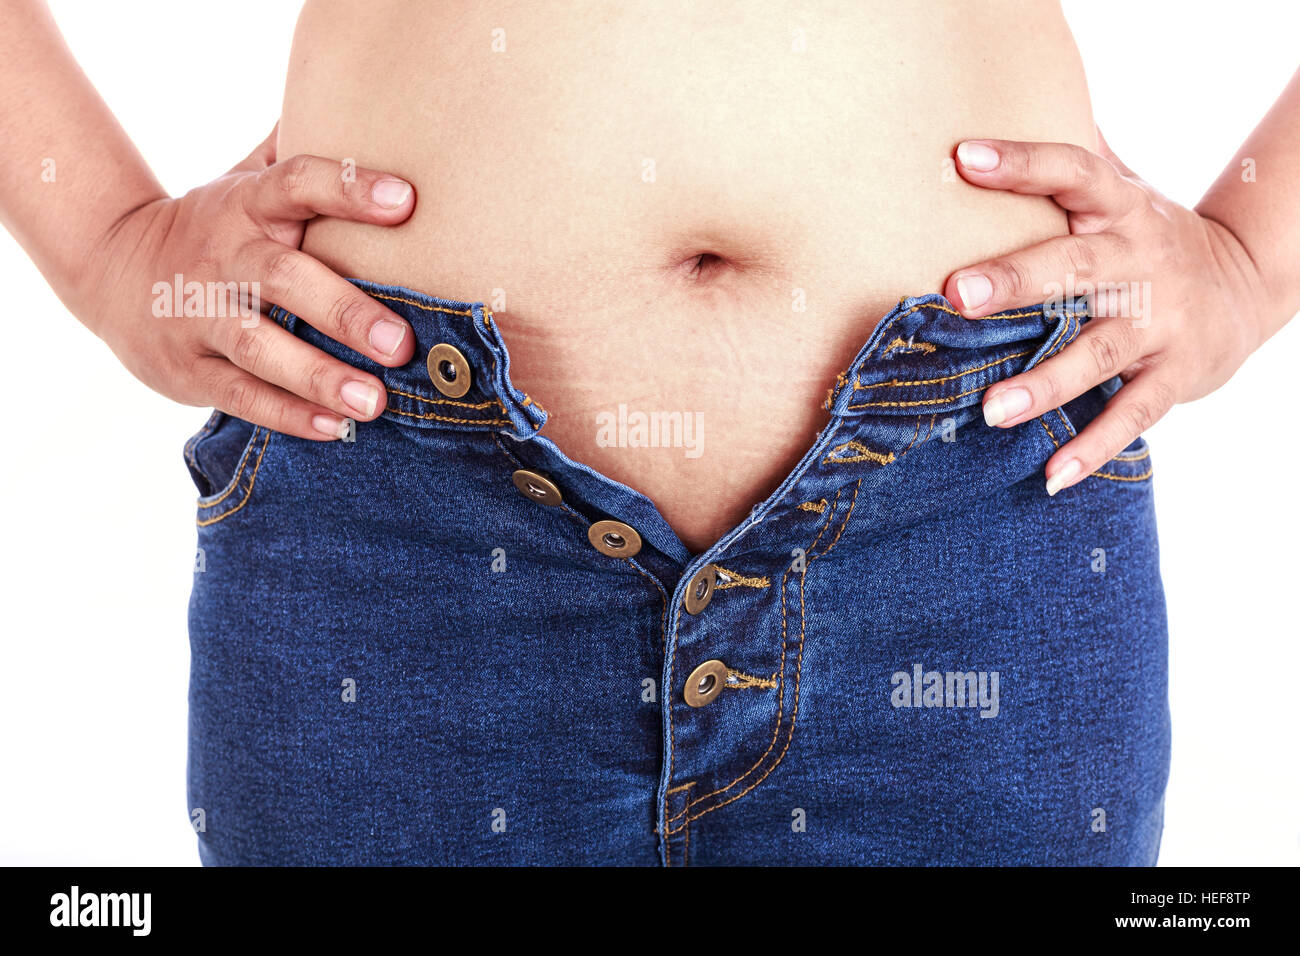 Close up fat woman trying to wear jeans : Fat and Healthy concept Stock  Photo - Alamy